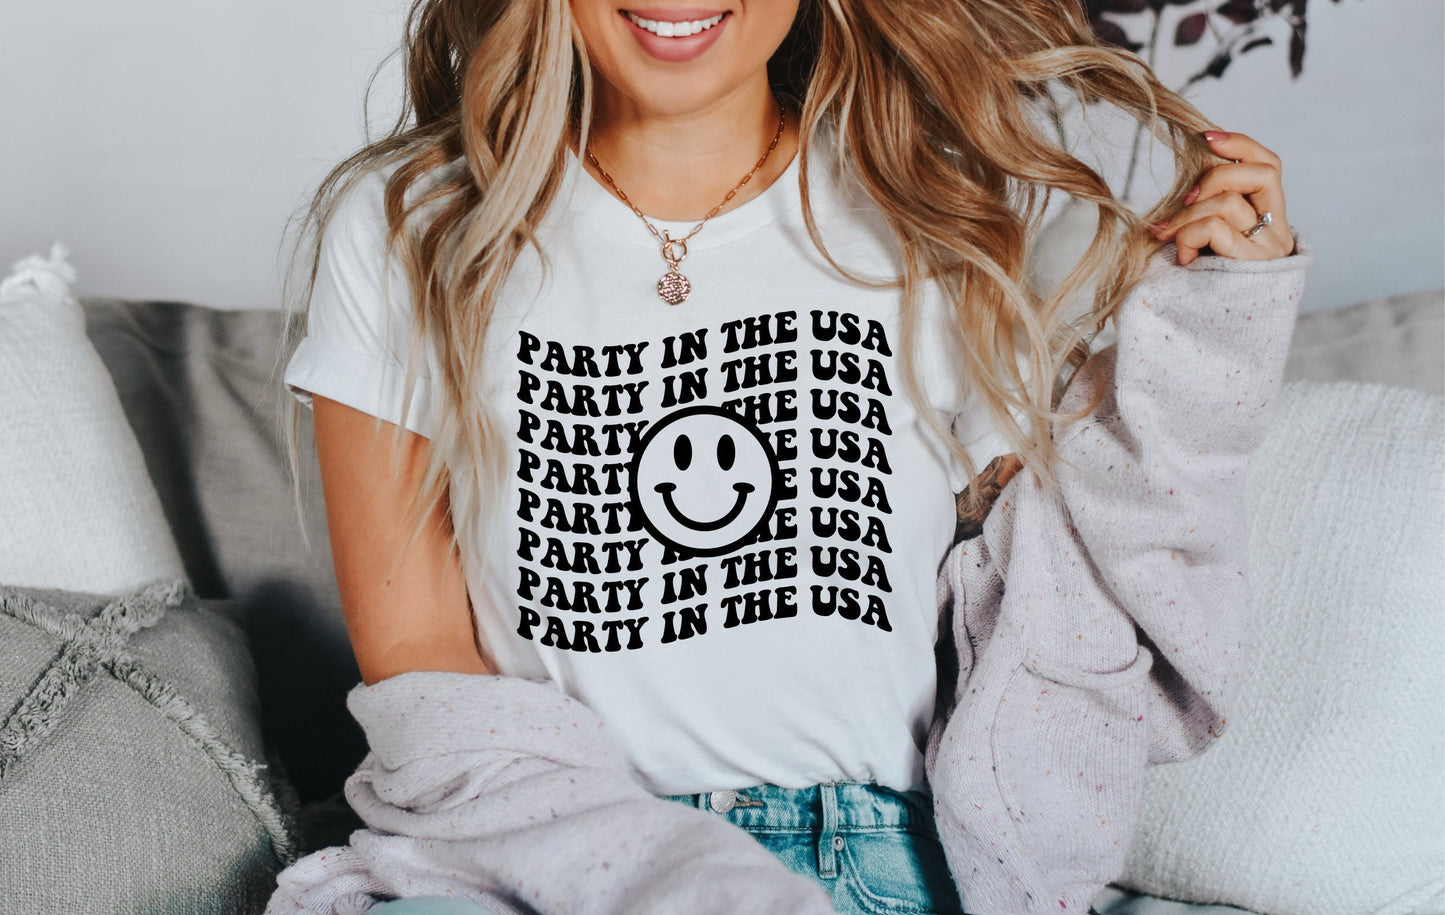 Party in the USA Smiley svg, USA Smiley Face png, Smiley Face, Have a Good Day svg, Retro Smiley Face